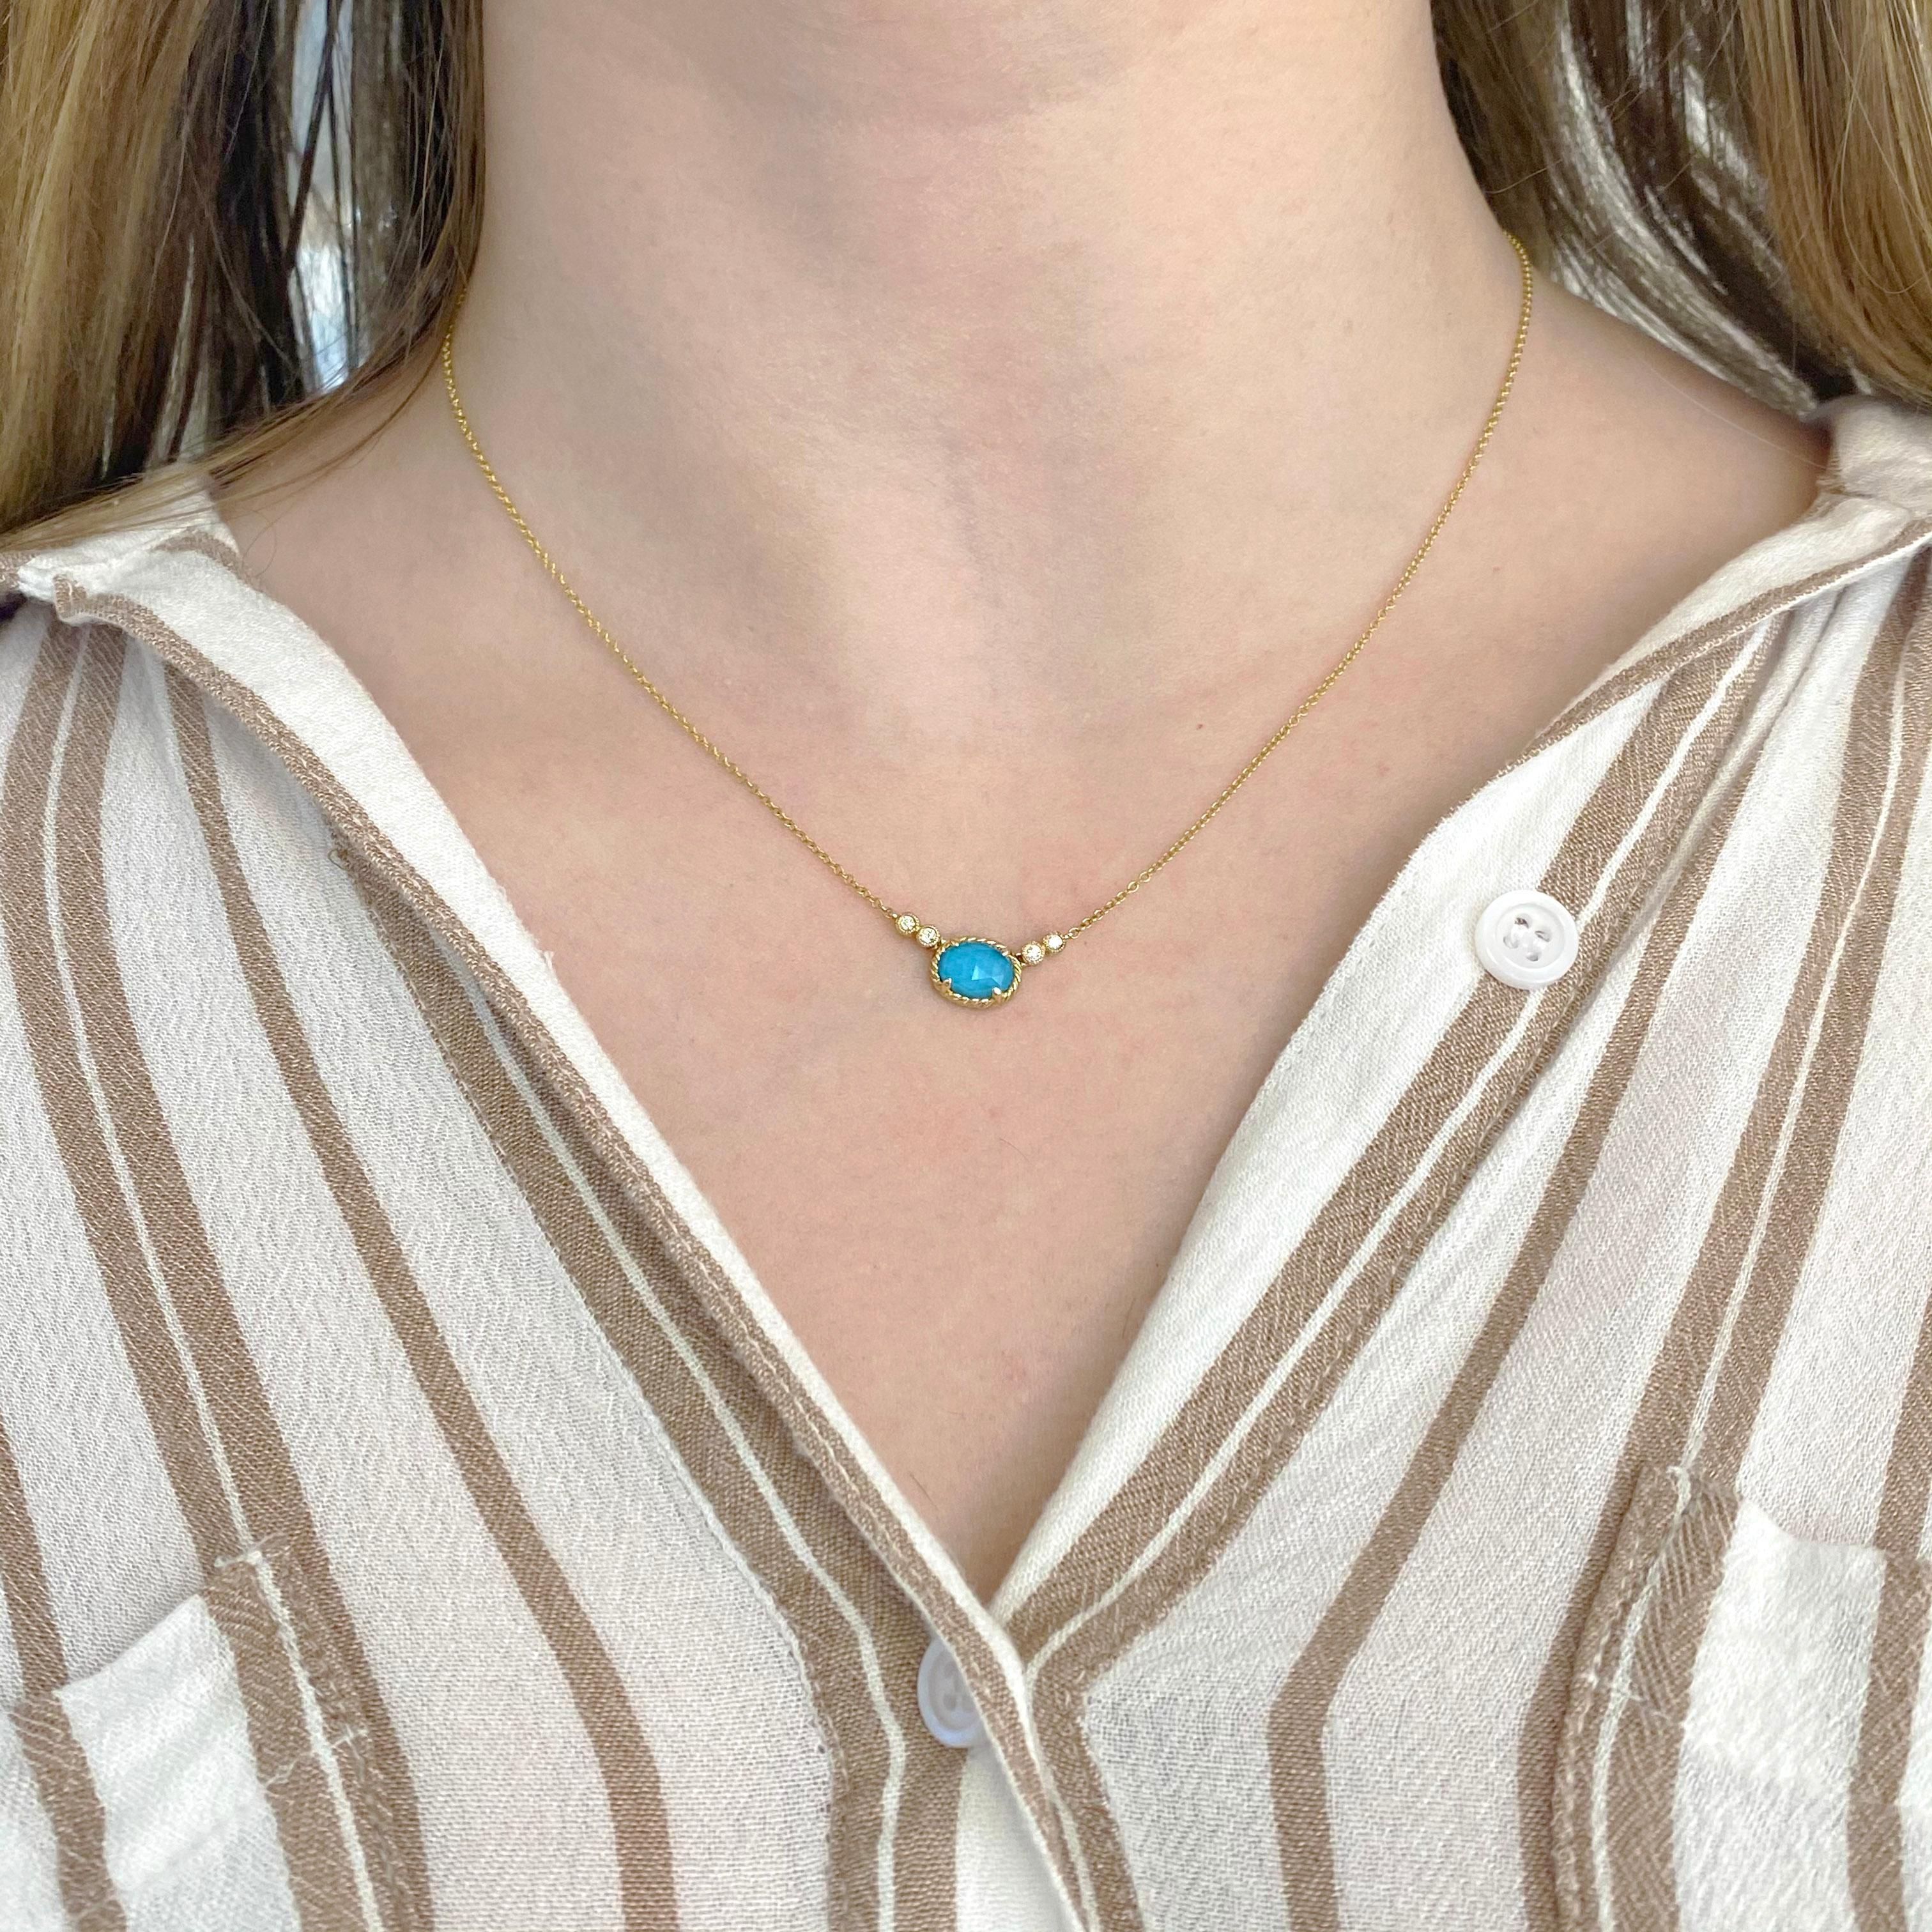 This designer turquoise and diamond necklace is very attractive and unique!  The turquoise is combined with white quartz so that it really reflects the light and then there are two accent diamonds on either side.  The rope design around the